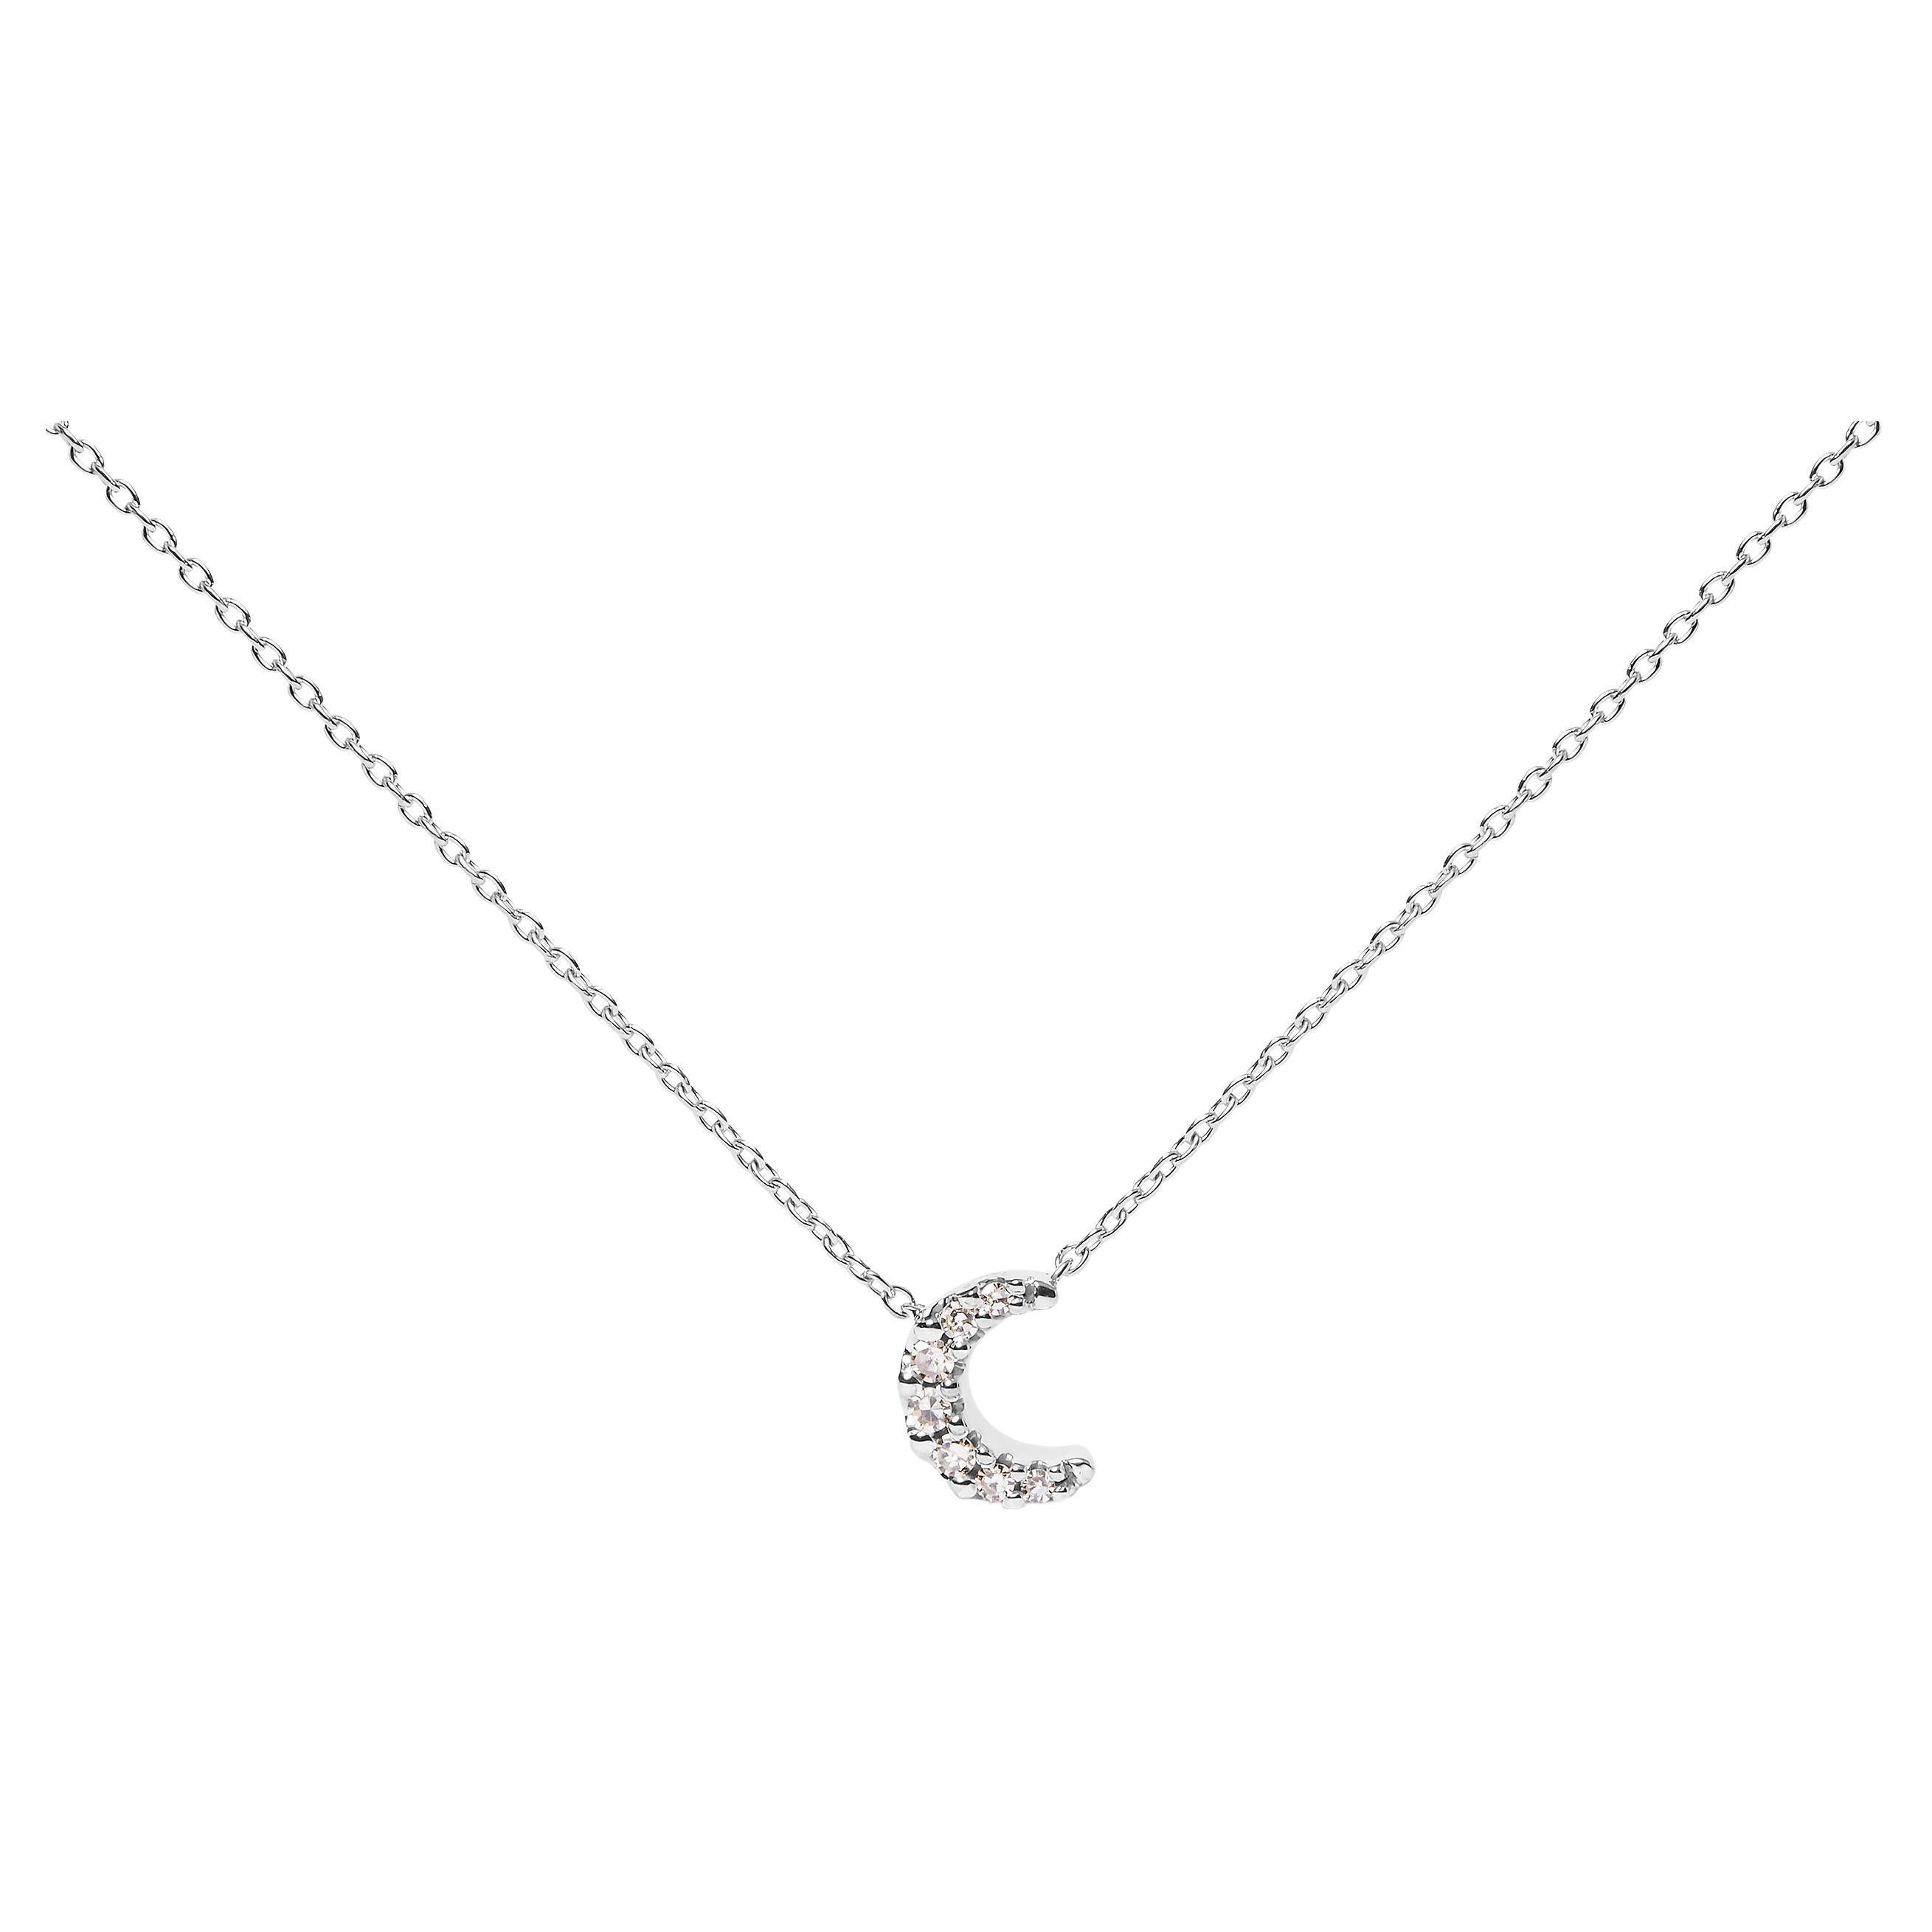 10K White Gold Diamond Accented Crescent Moon Shaped 18" Inch Pendant Necklace